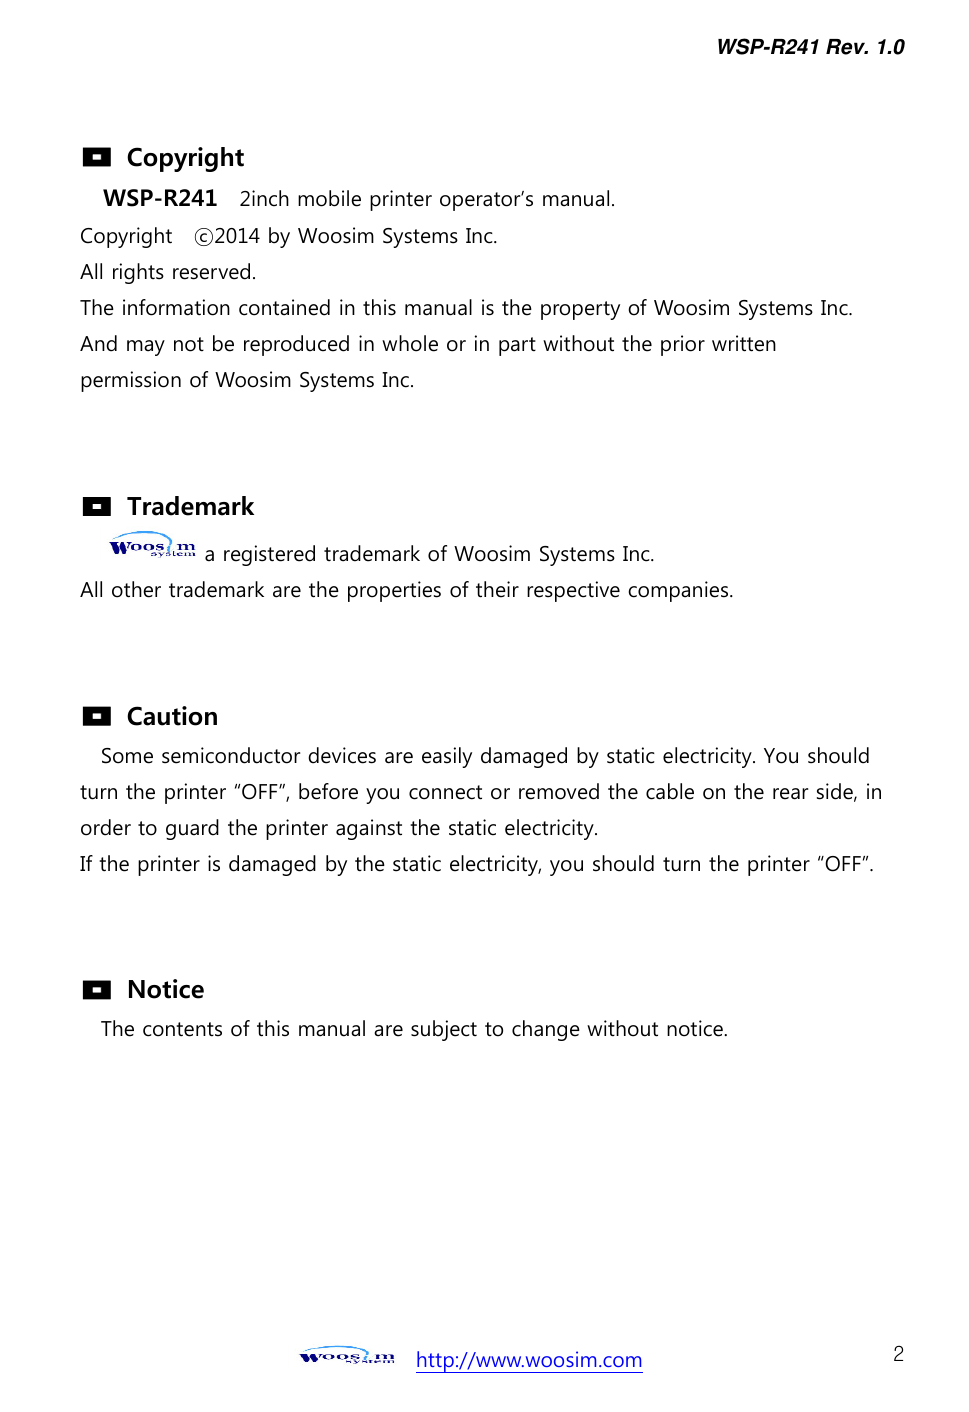 WSP-R241 Rev. 1.0    http://www.woosim.com 2                                  Copyright WSP-R241  2inch mobile printer operator’s manual. Copyright    ⓒ2014 by Woosim Systems Inc. All rights reserved. The information contained in this manual is the property of Woosim Systems Inc. And may not be reproduced in whole or in part without the prior written   permission of Woosim Systems Inc.     Trademark a registered trademark of Woosim Systems Inc. All other trademark are the properties of their respective companies.     Caution   Some semiconductor devices are easily damaged by static electricity. You should turn the printer “OFF”, before you connect or removed the cable on the rear side, in order to guard the printer against the static electricity.   If the printer is damaged by the static electricity, you should turn the printer “OFF”.     Notice The contents of this manual are subject to change without notice. 